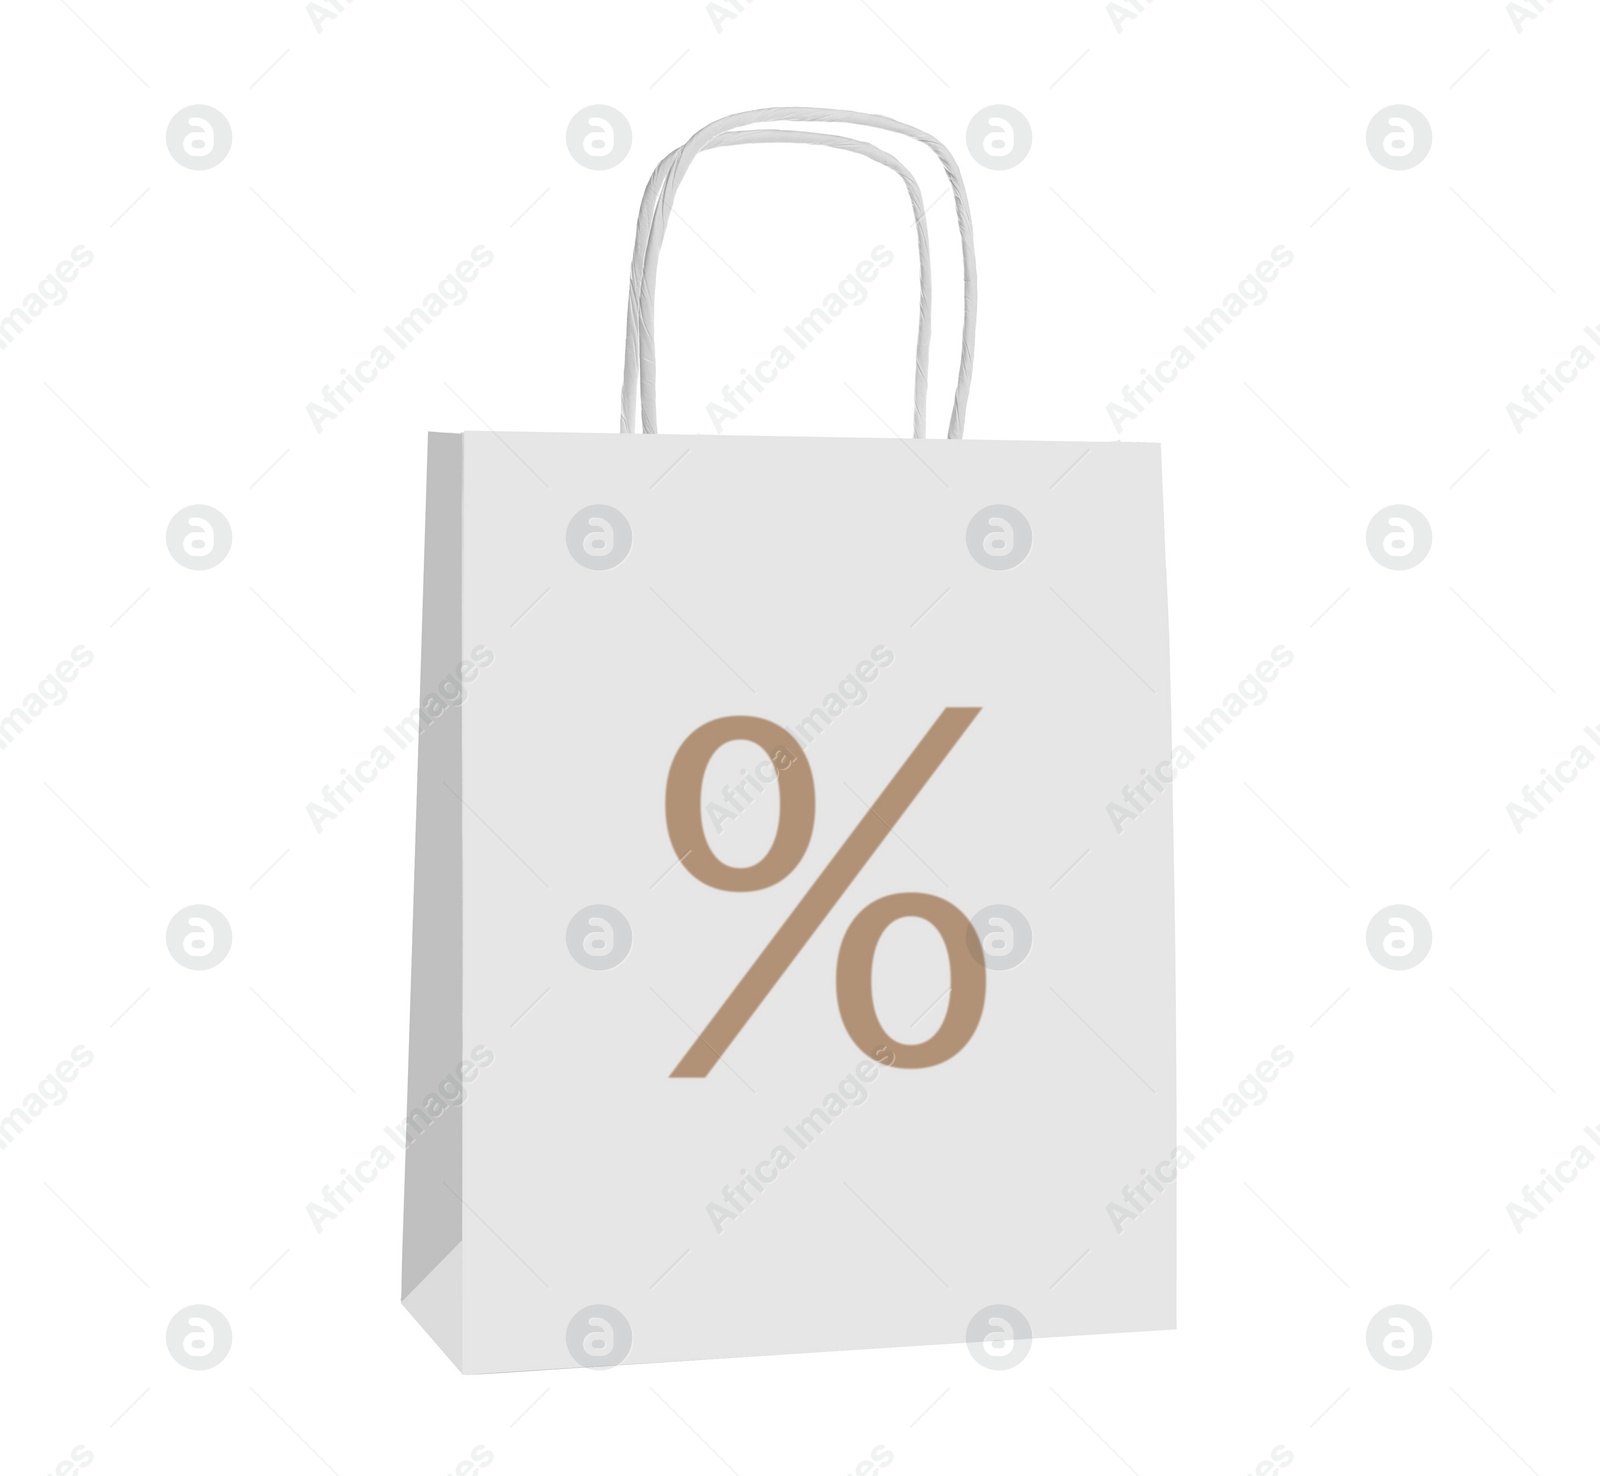 Image of Paper bag with percent sign isolated on white